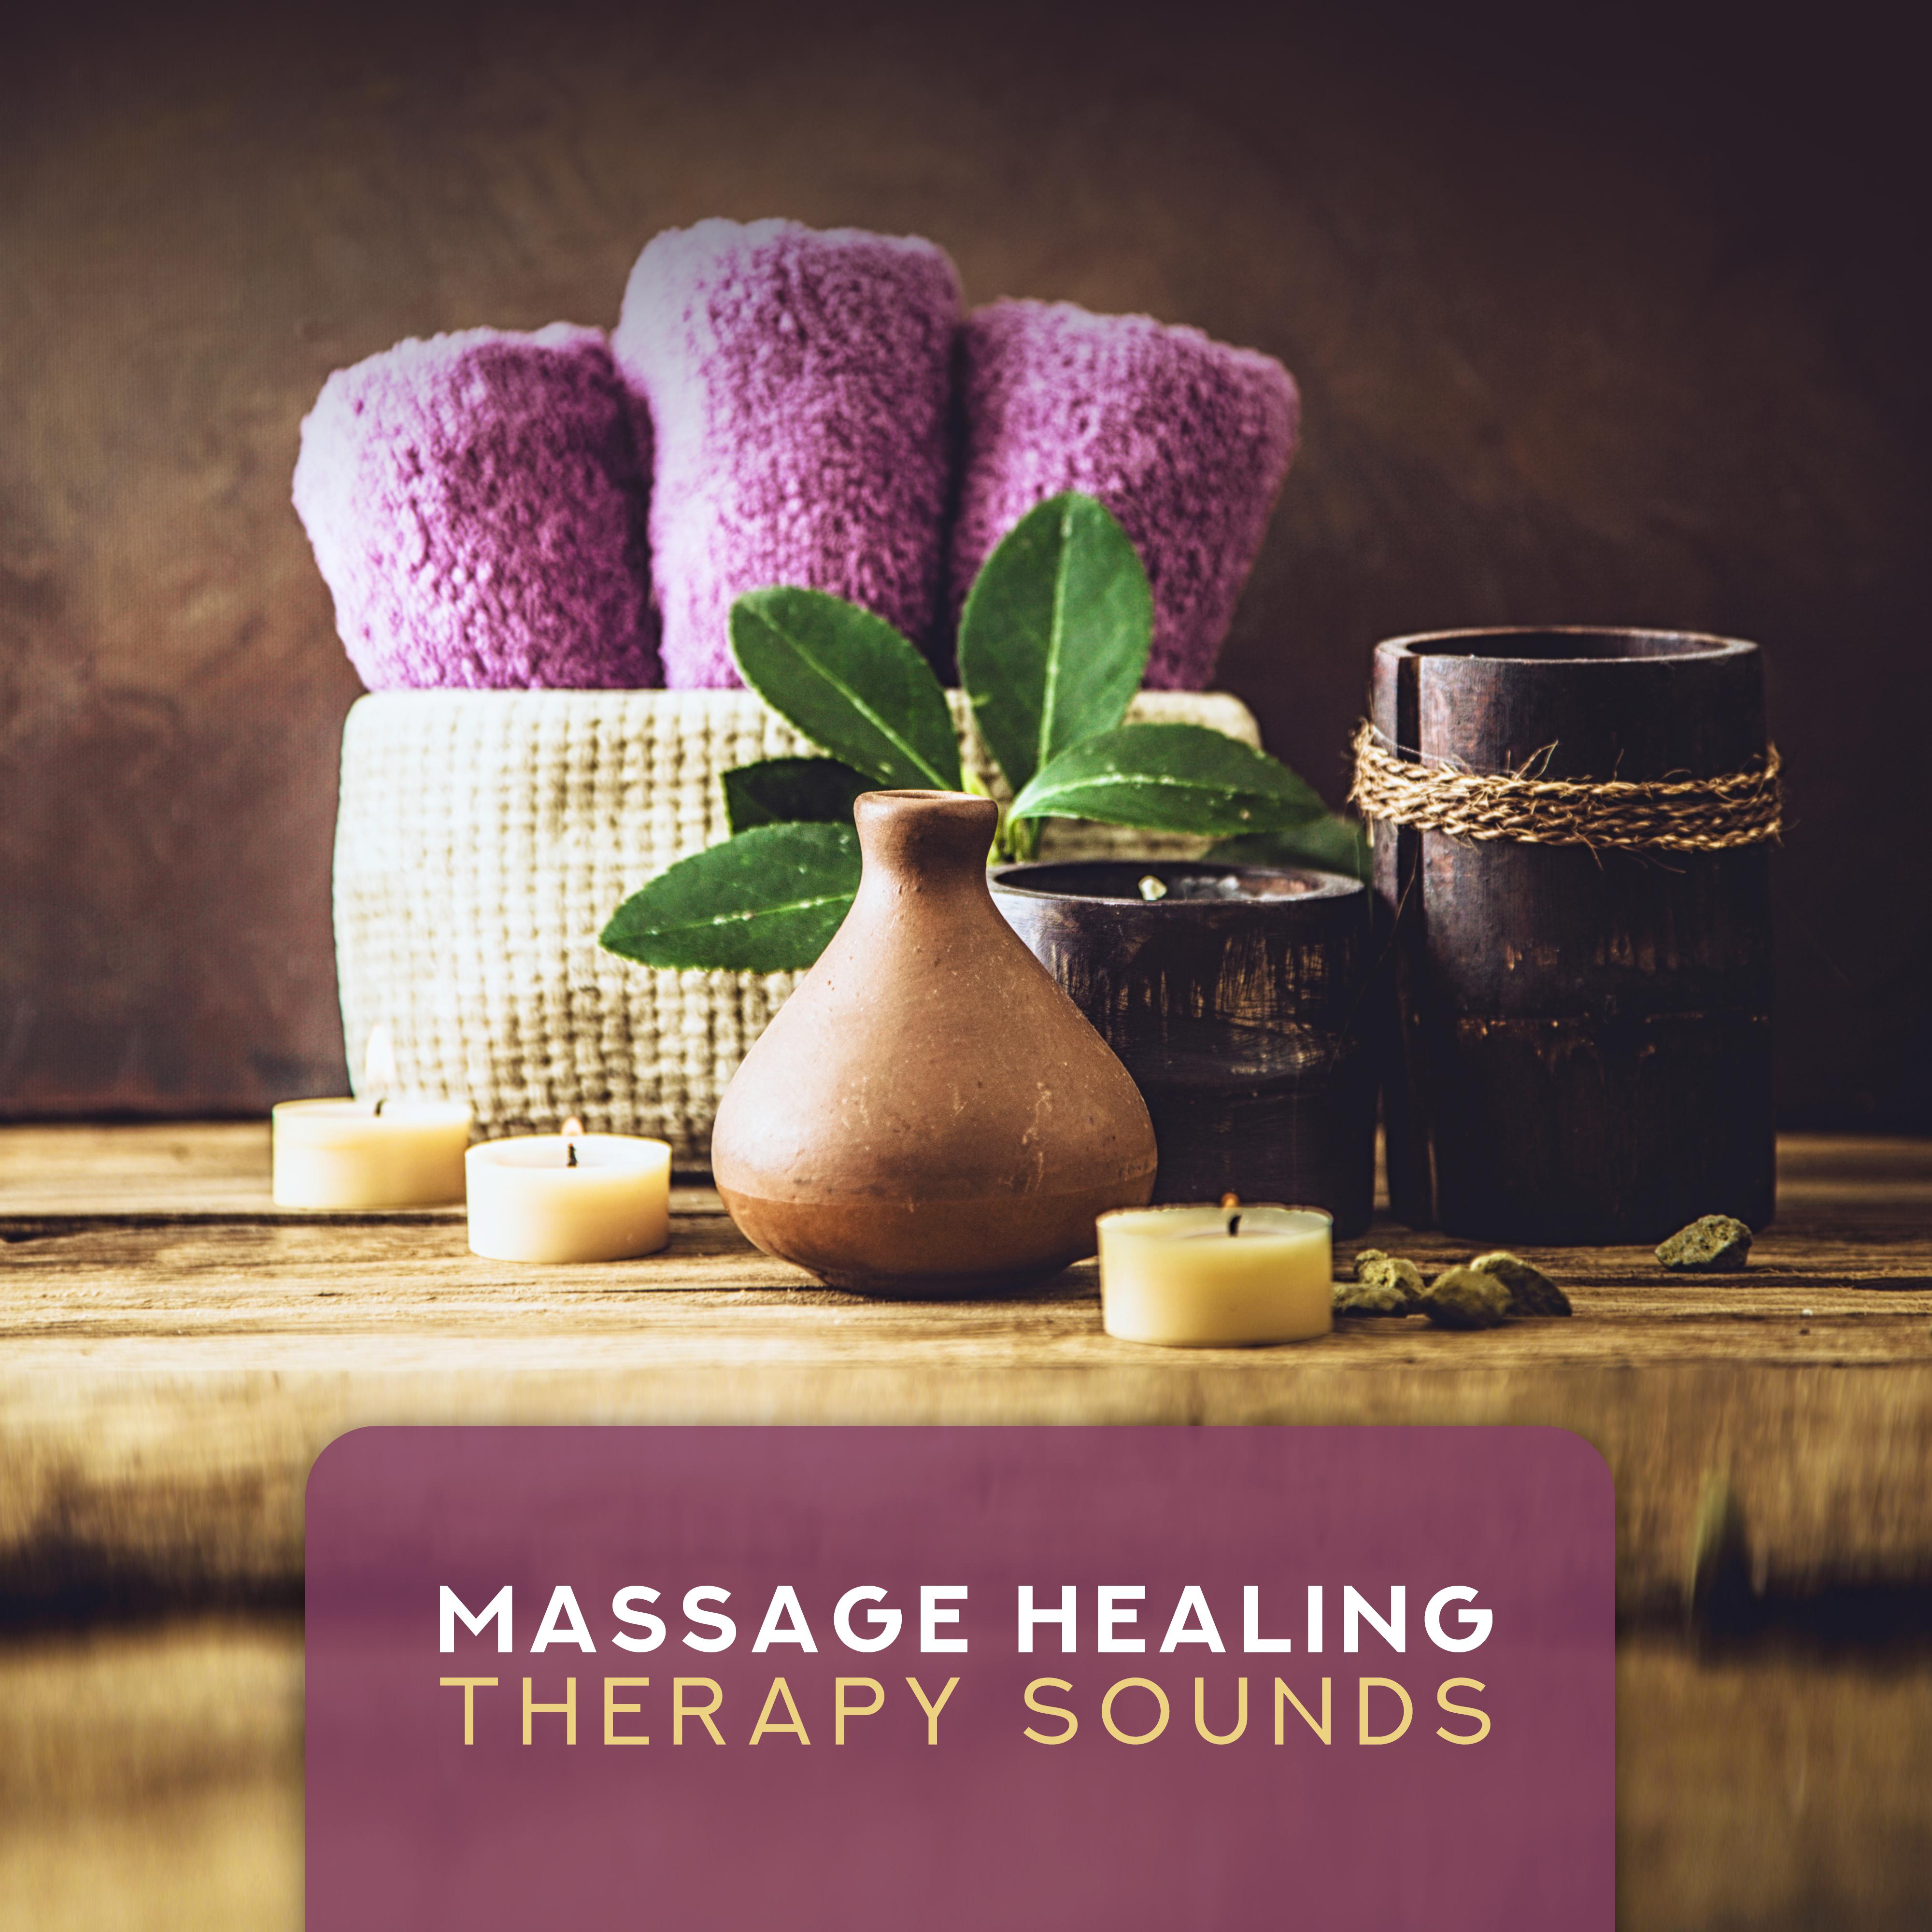 Massage Healing Therapy Sounds: 2019 New Age Music Compilation for Massage Salon & Wellness